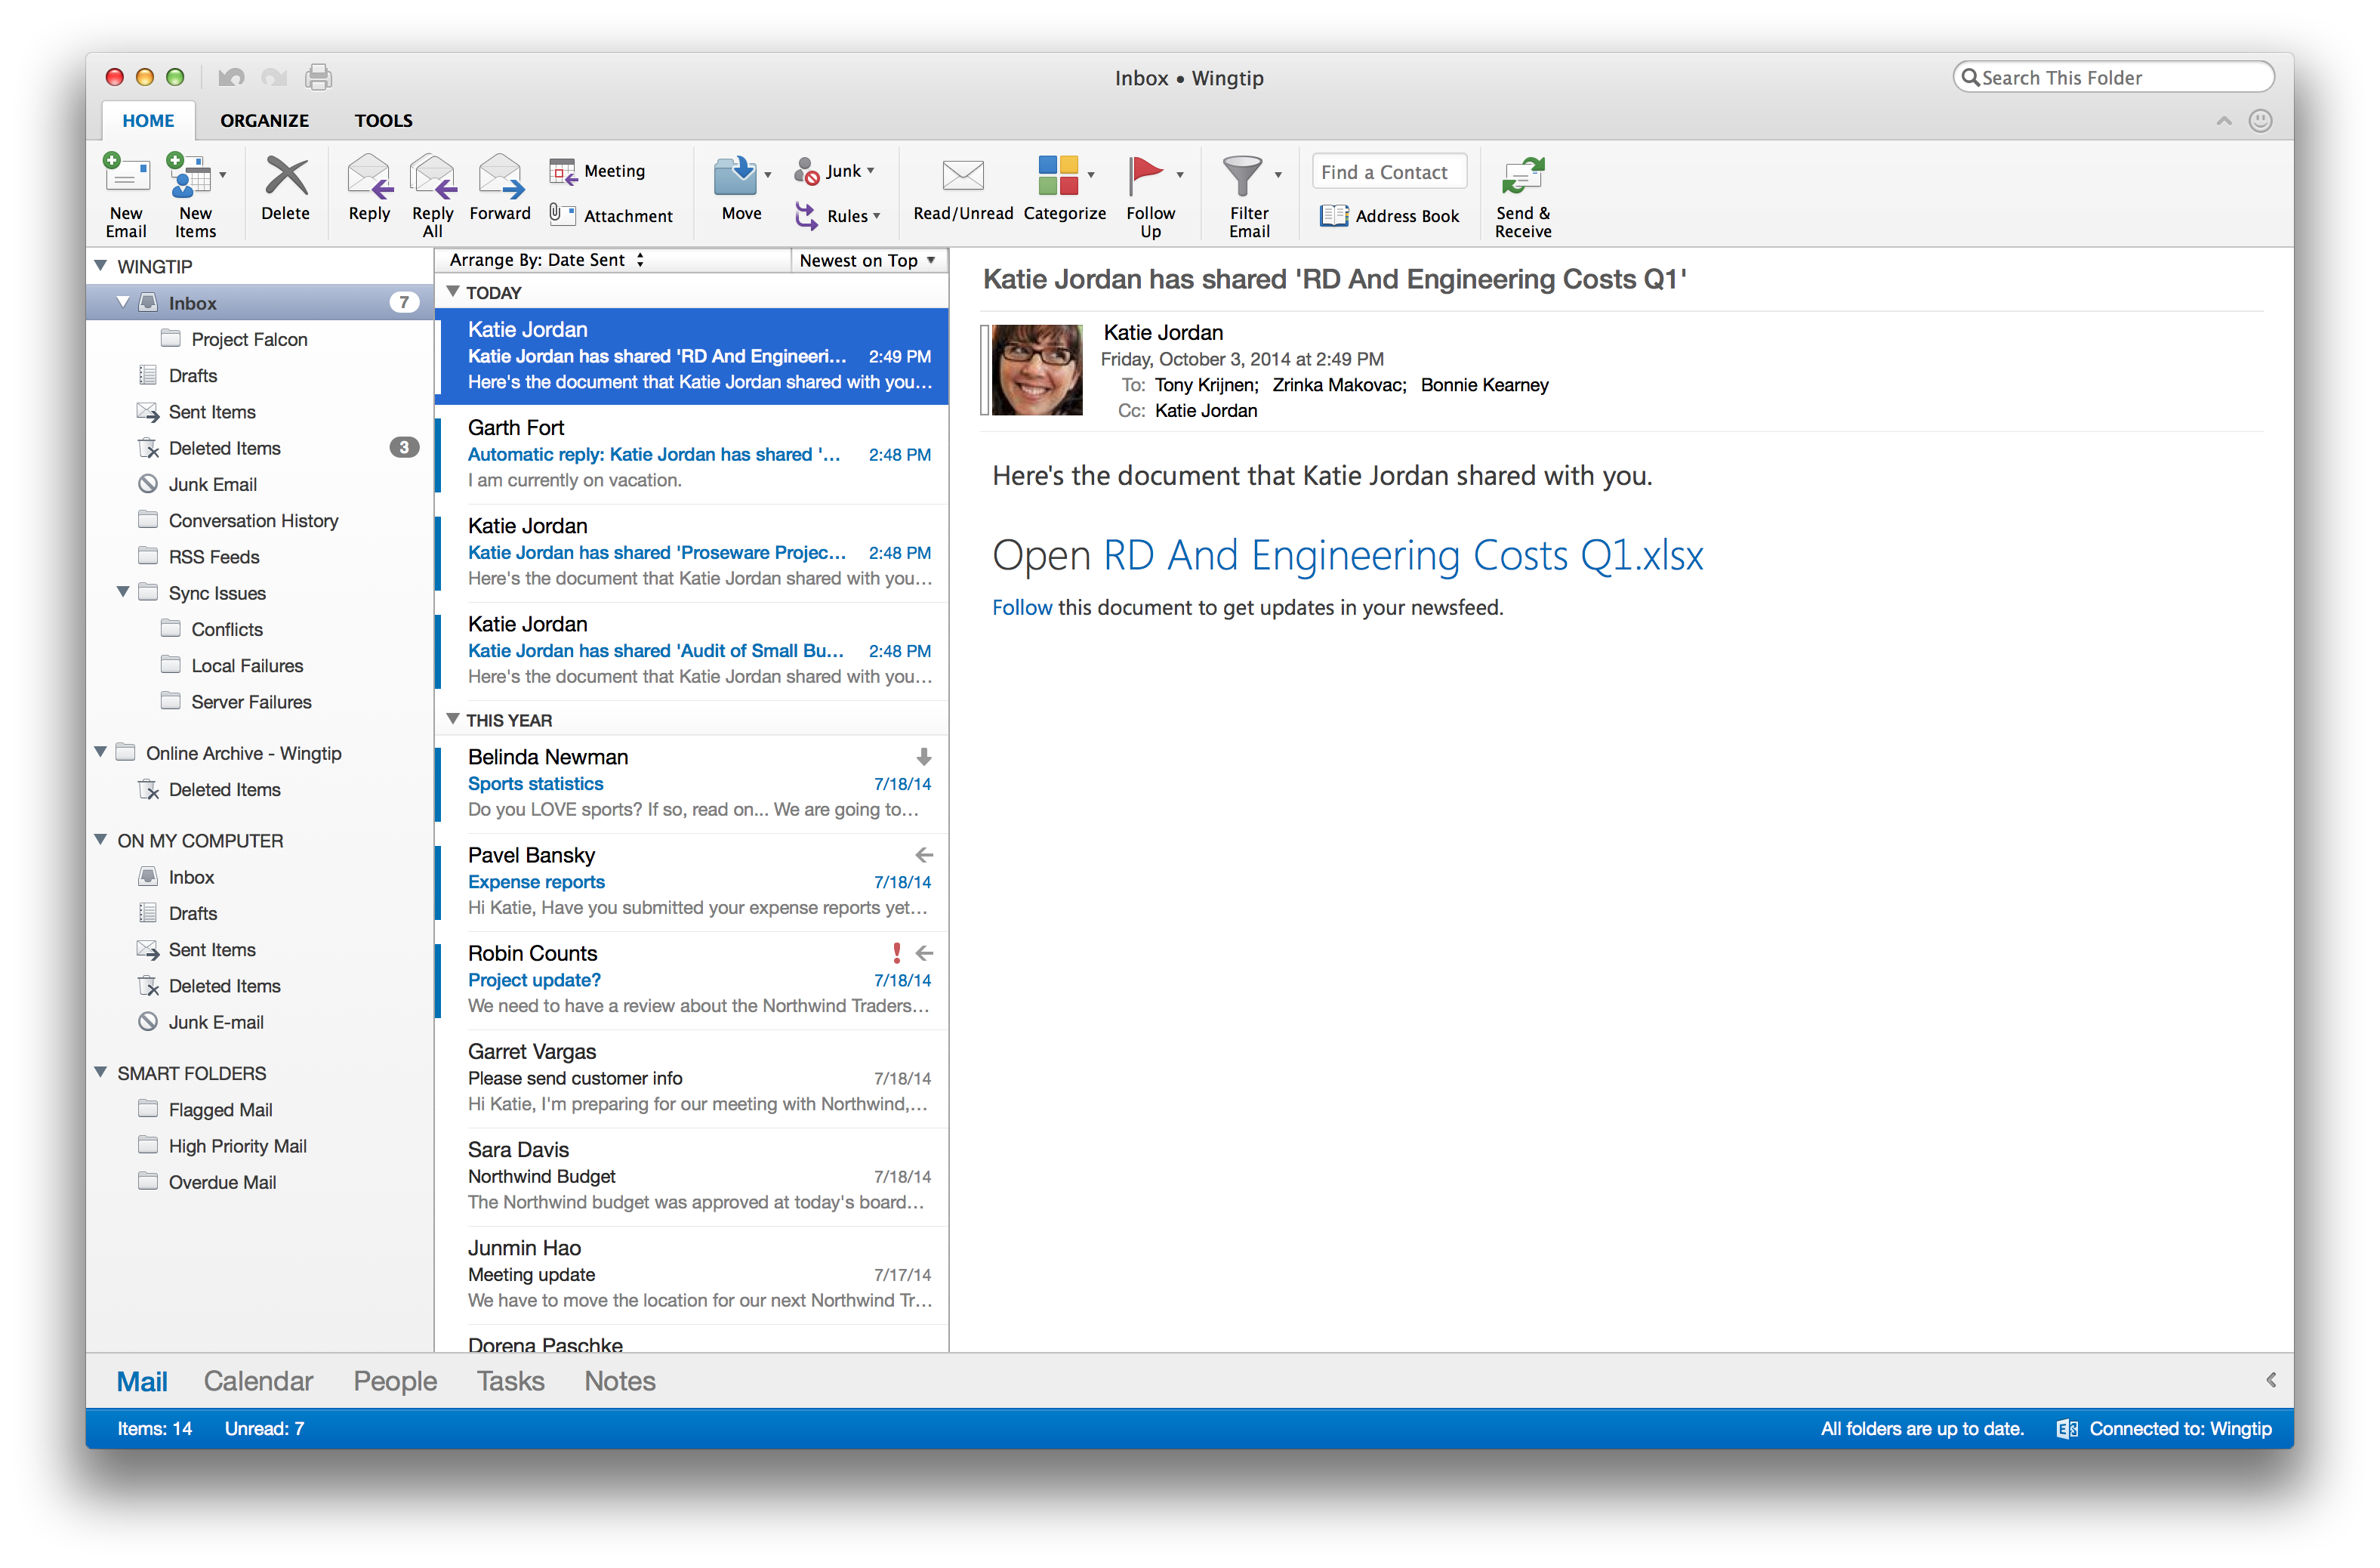 office 365 for mac home